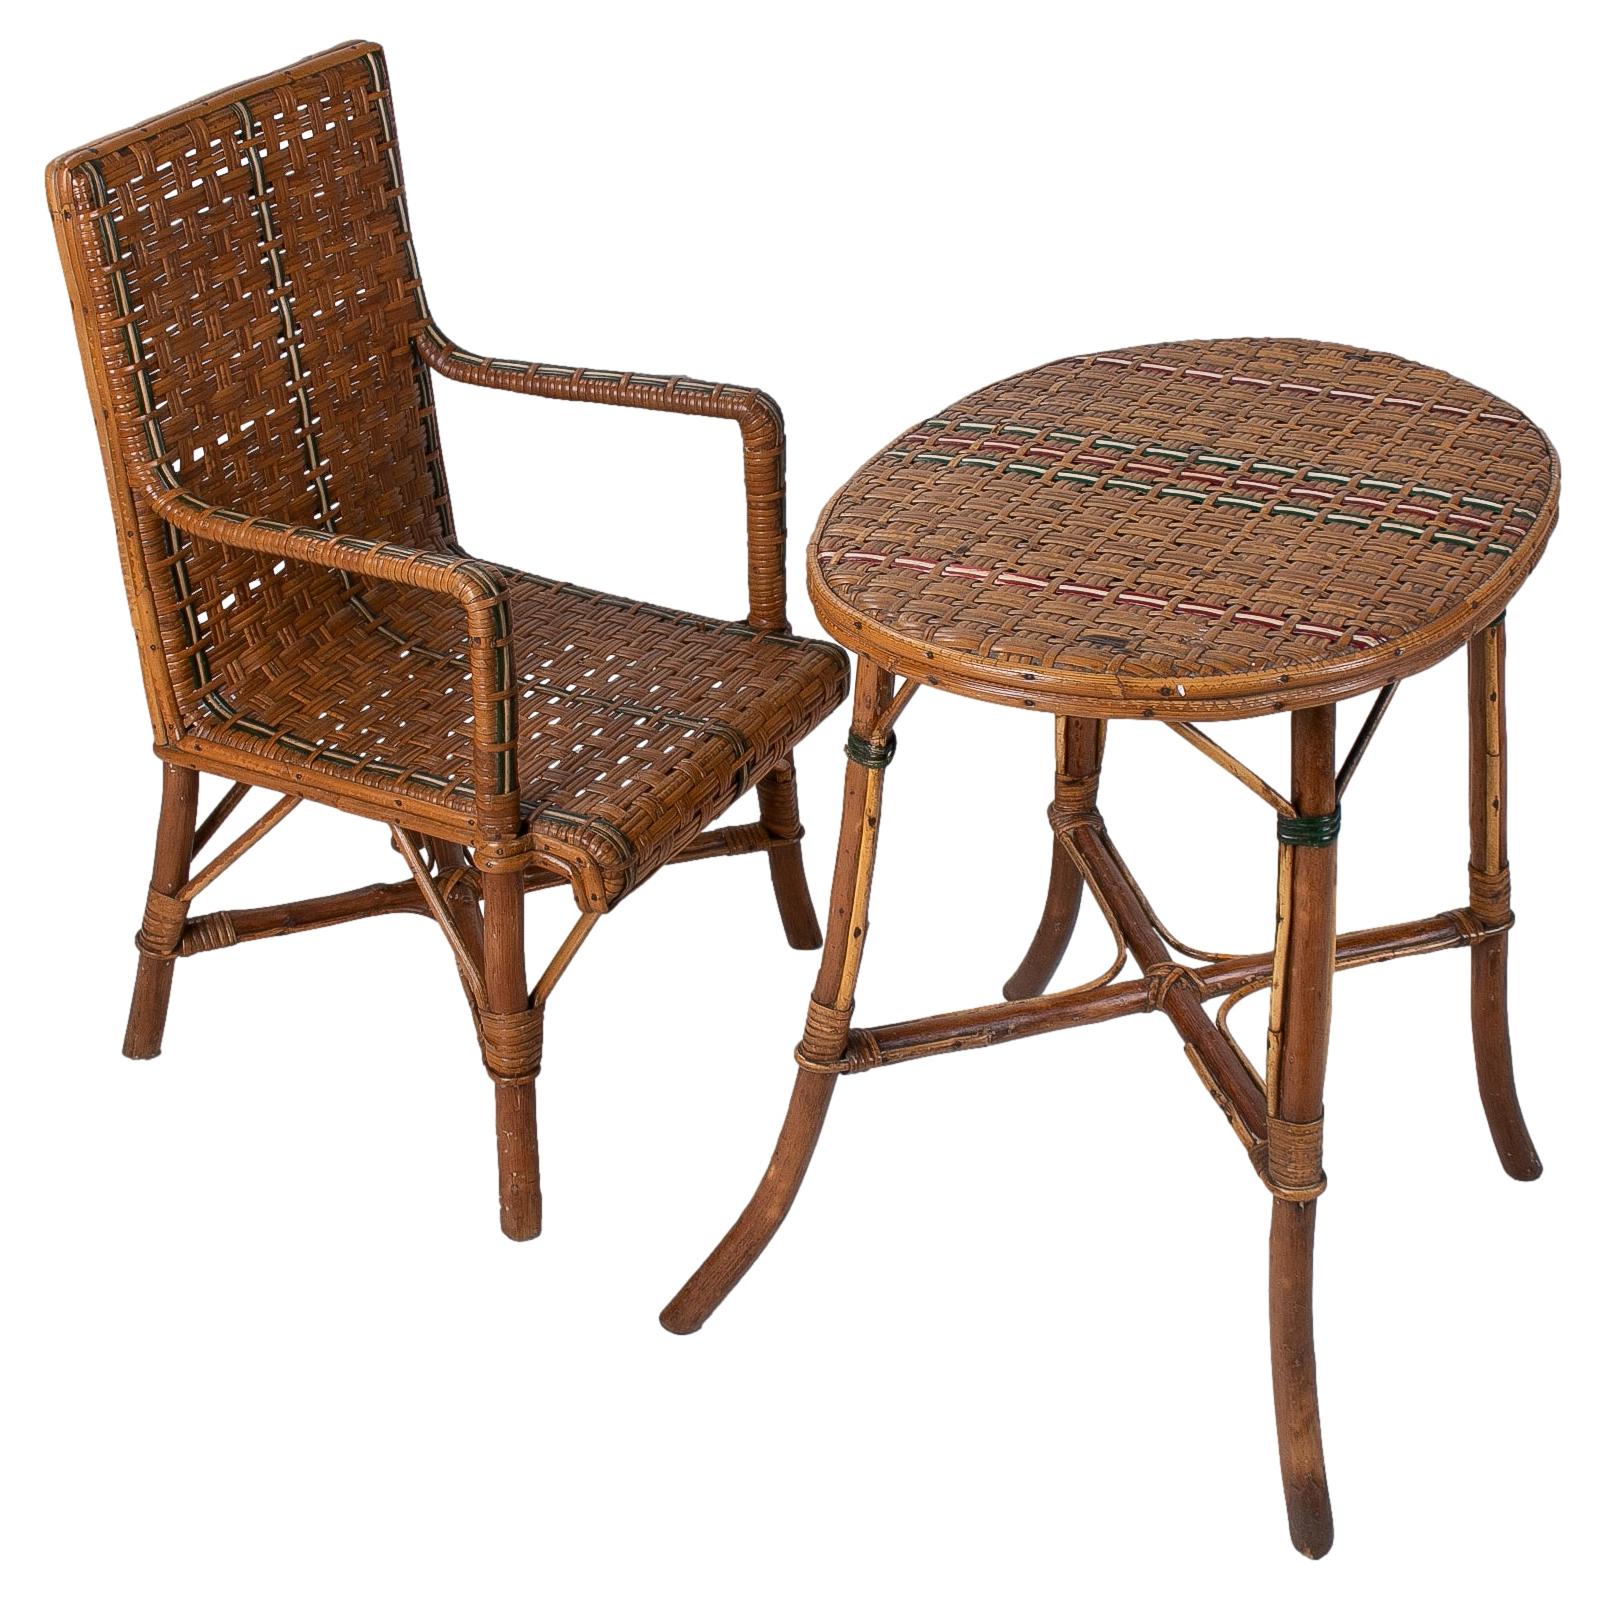 Set of 1950s Spanish Children's Size Lace Wicker & Bamboo Chair w/ Table